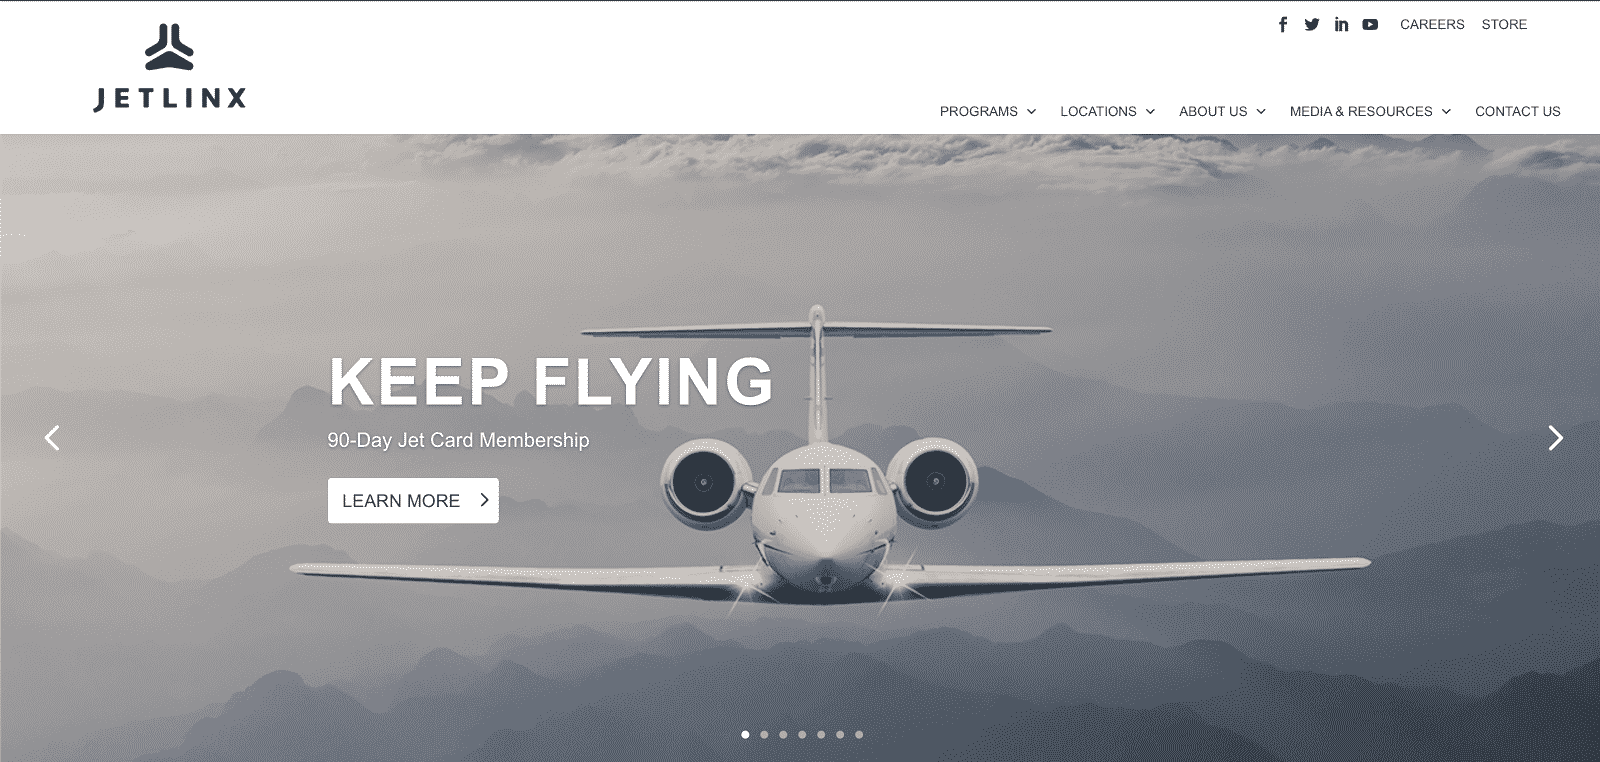 The Jet Linx homepage